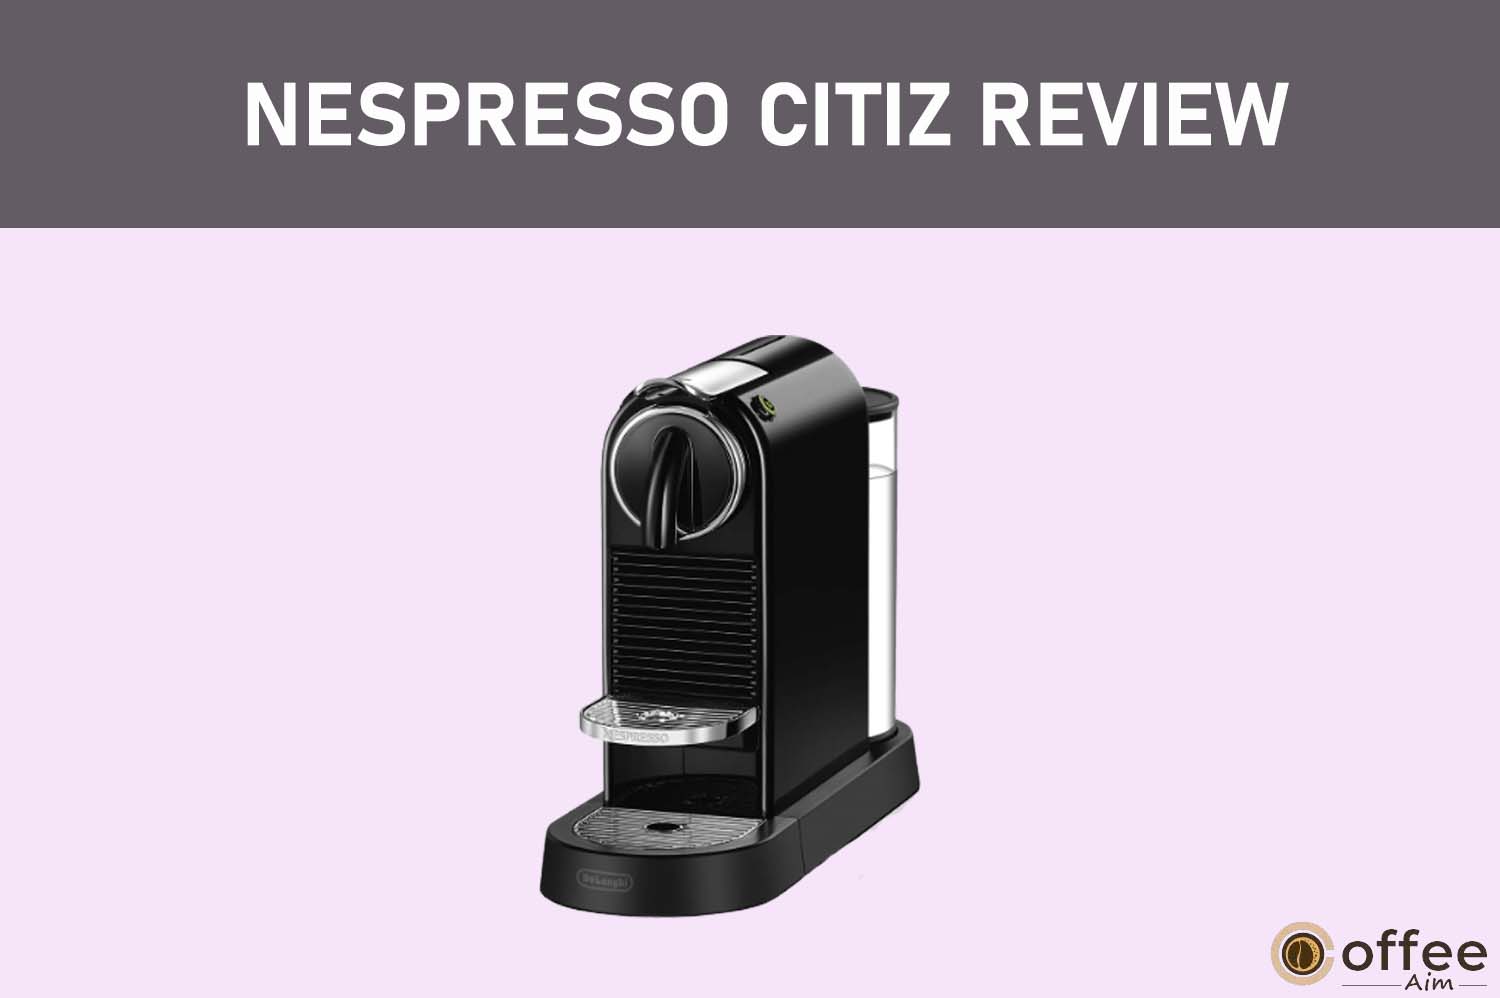 Featured image for the article "Nespresso CitiZ Review"